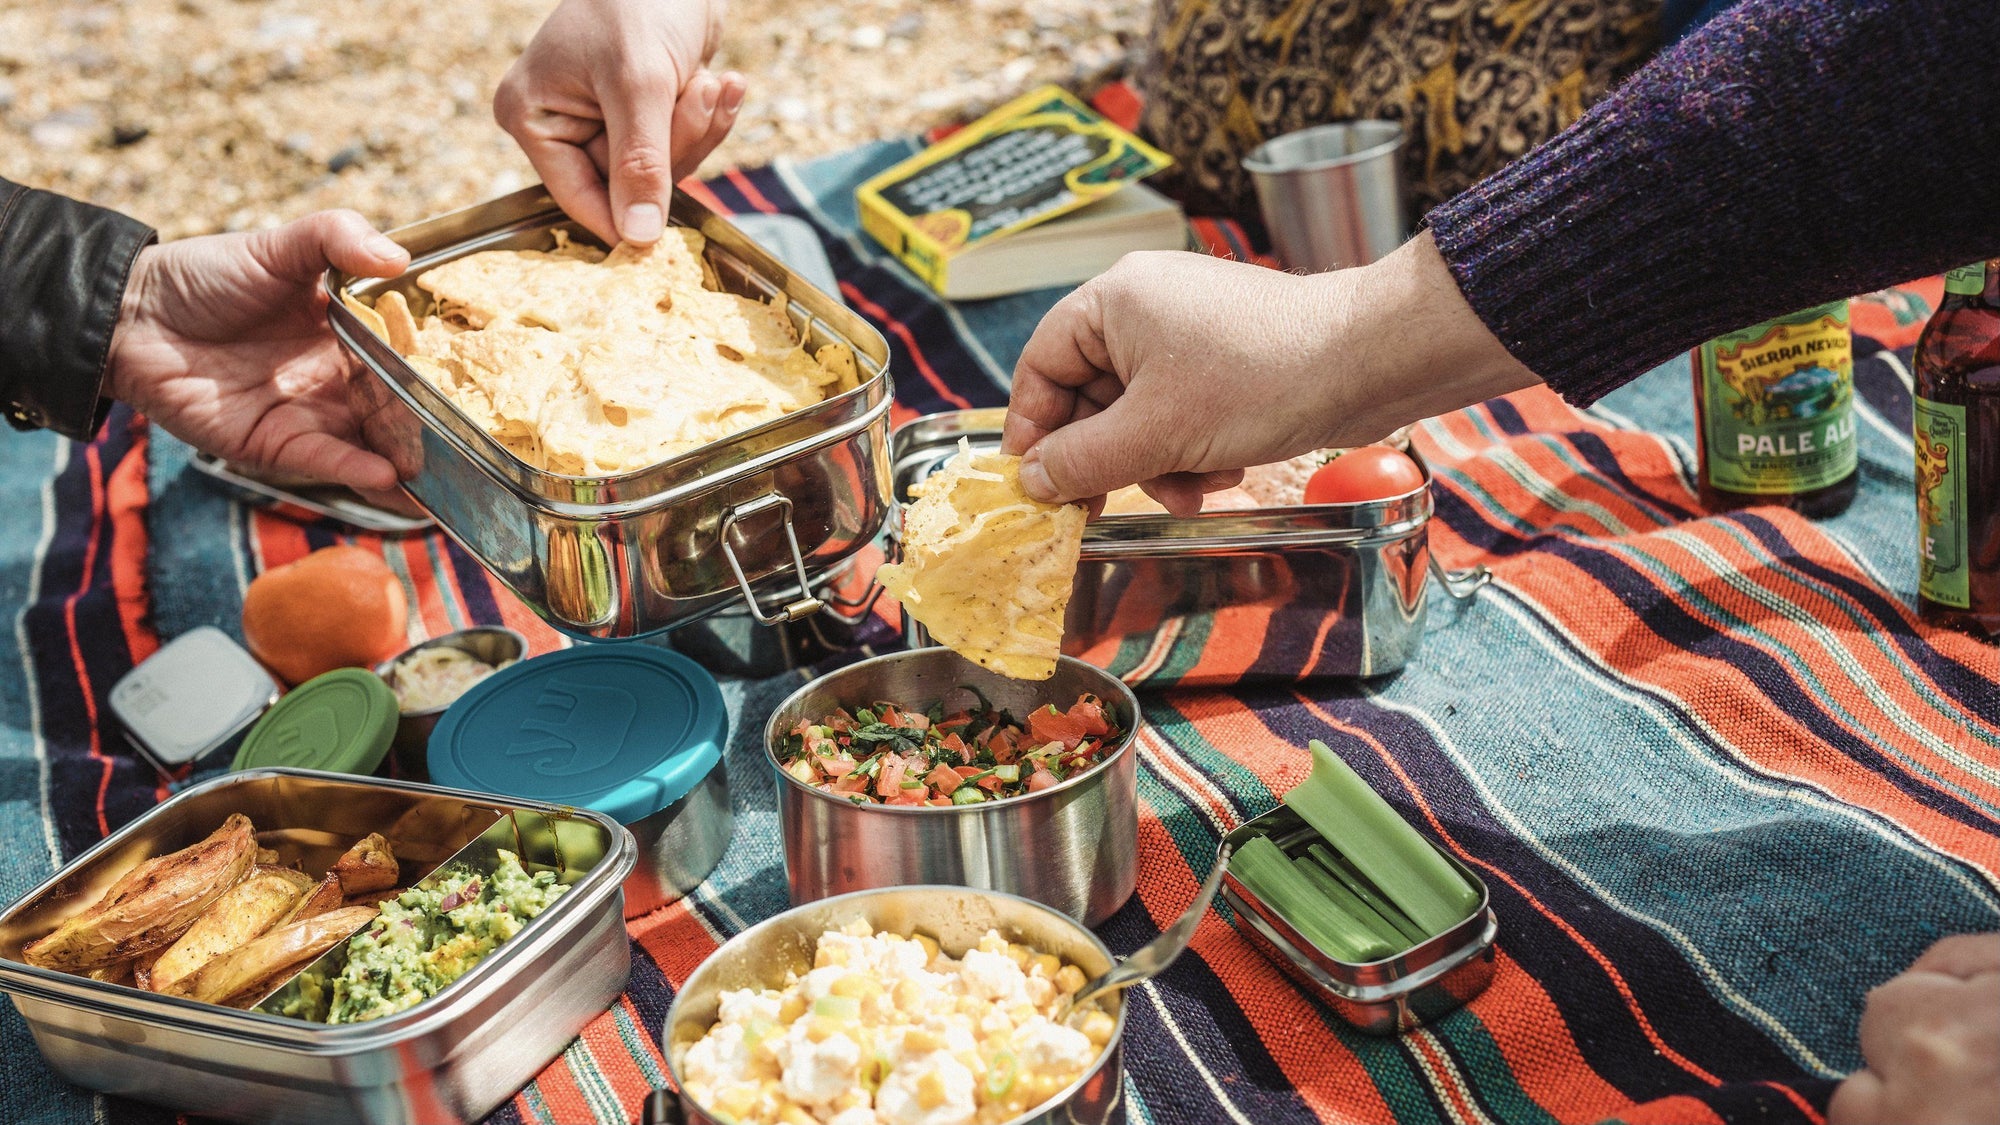 PACK A (PLANTBASED) PICNIC